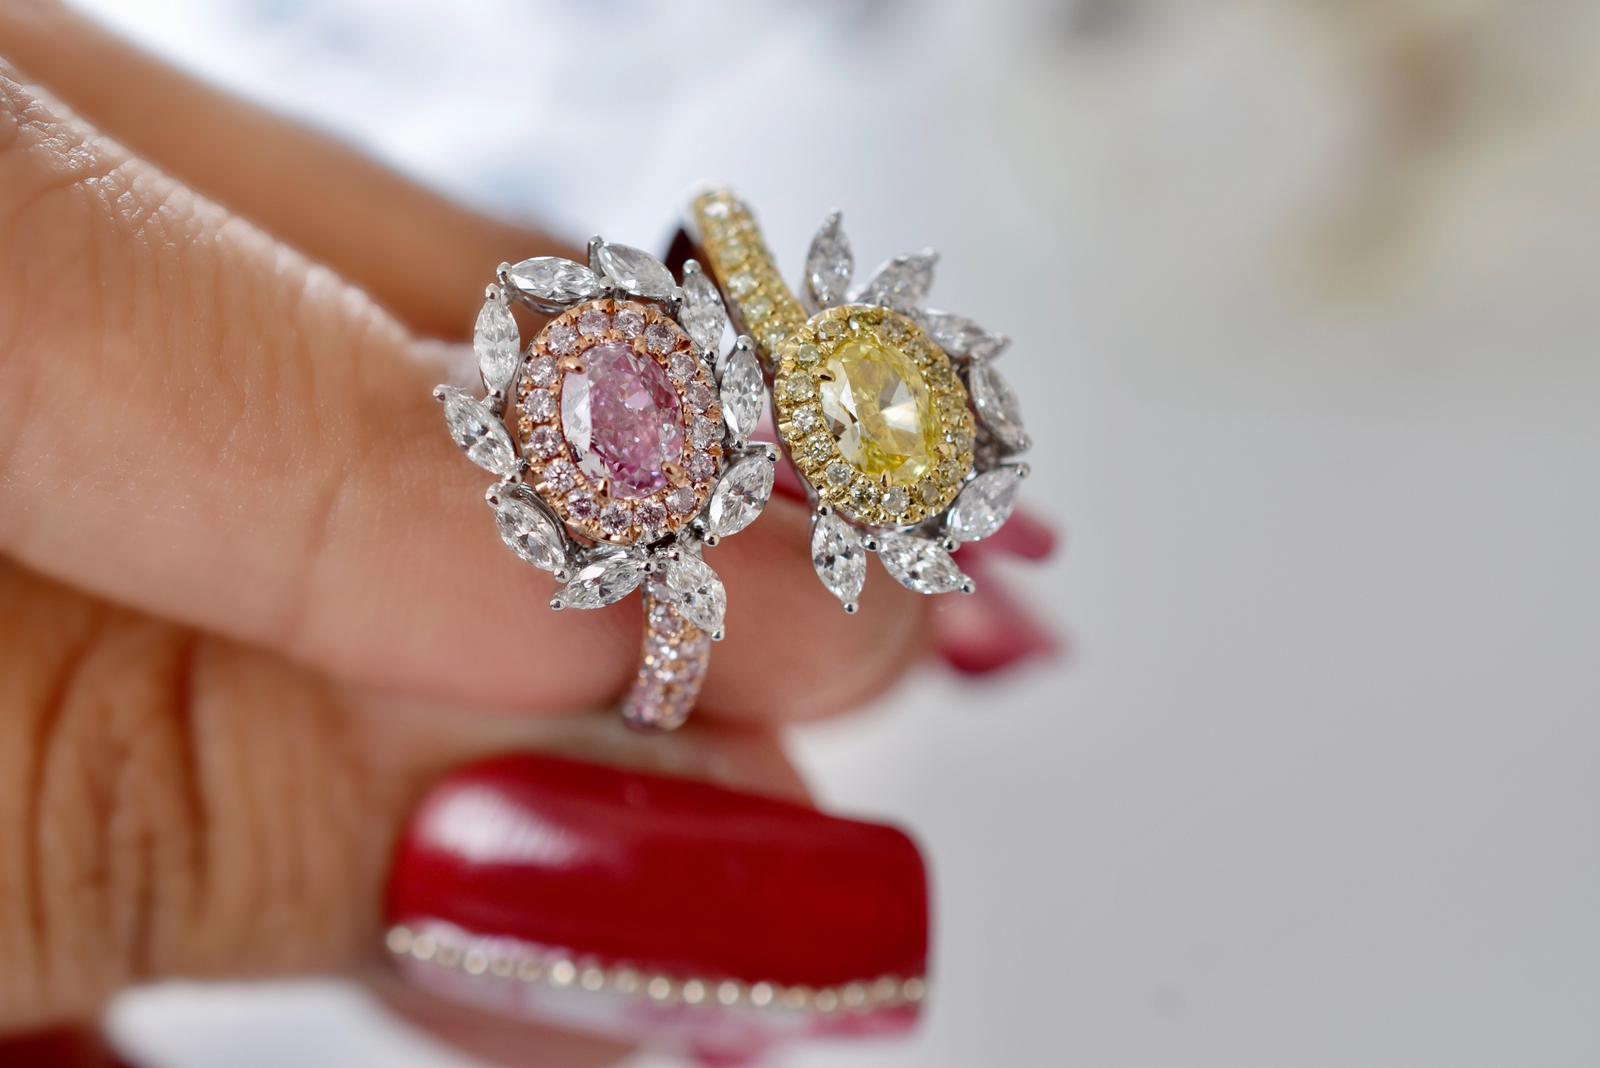 Oval Cut 0.83 Carat Yellow & Pink Diamond Cocktail Ring GIA Certified